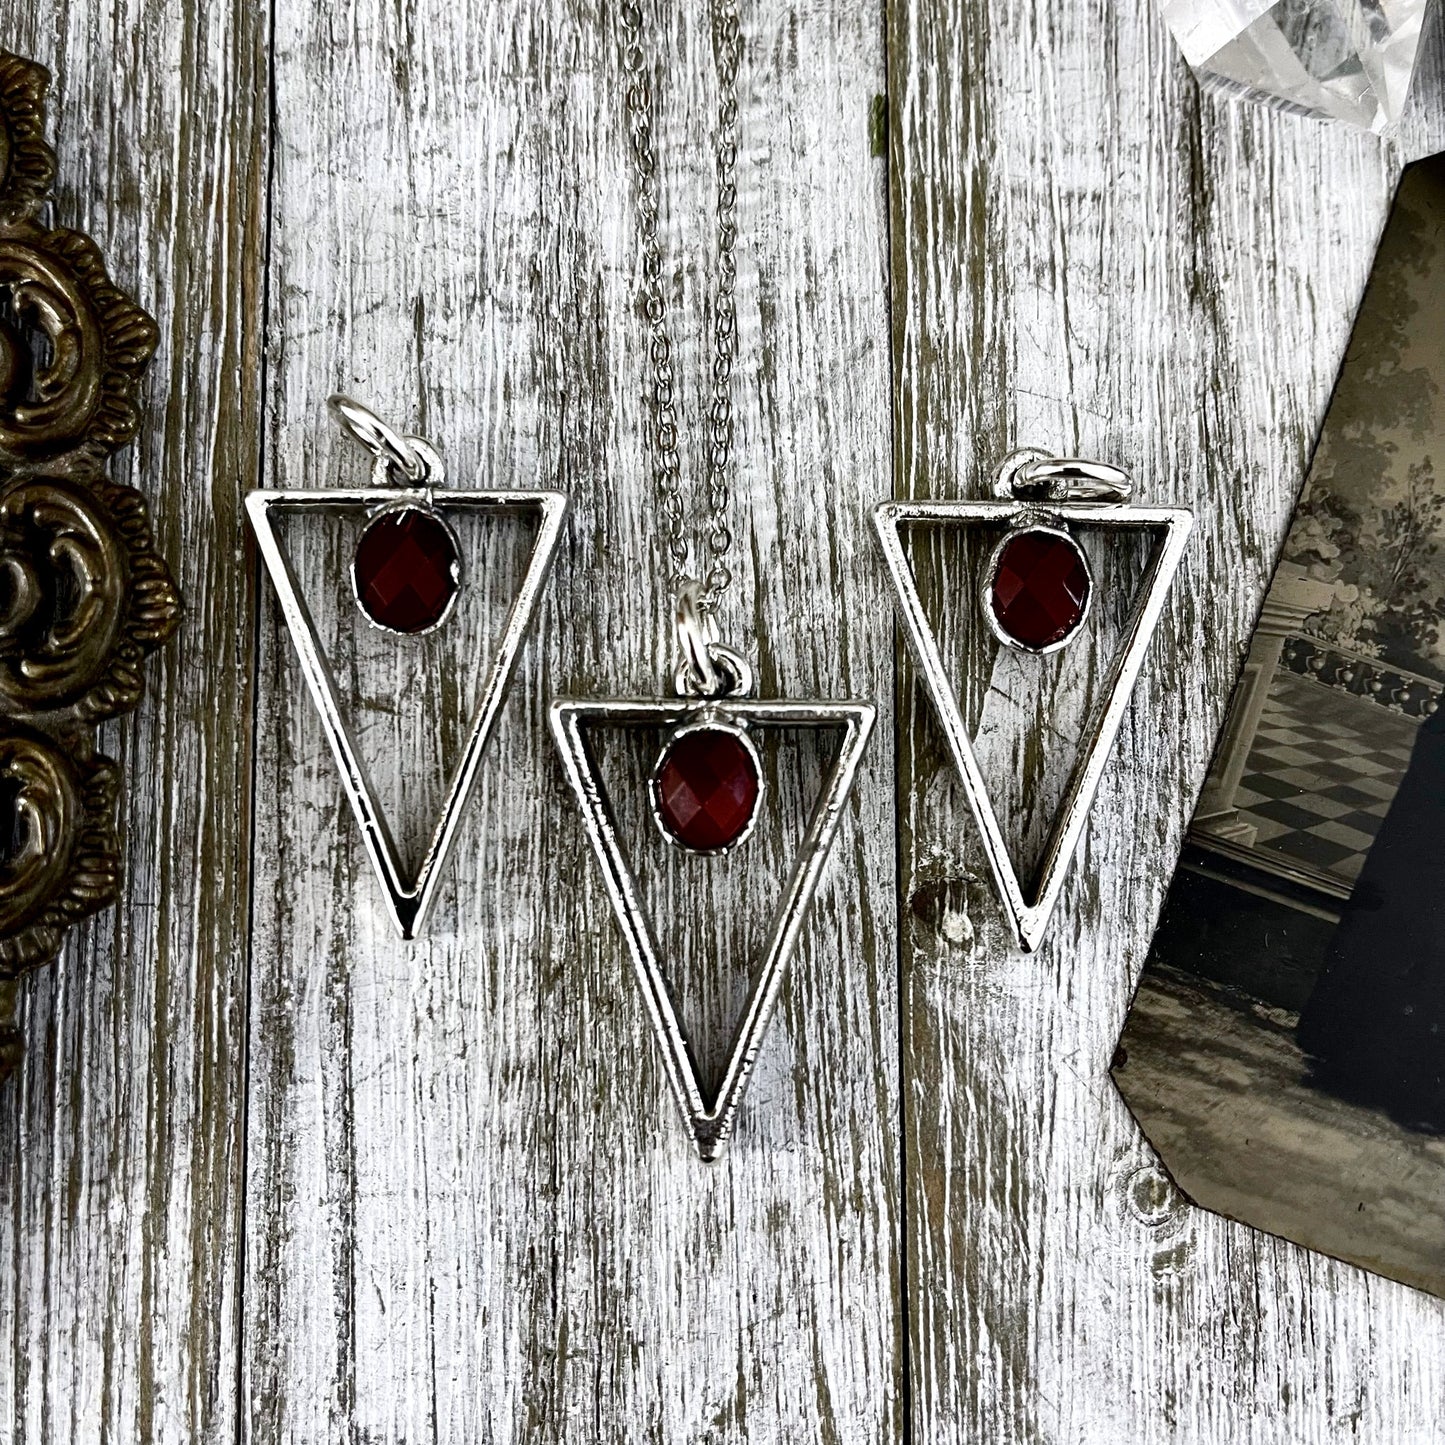 Triangular Carnelian Crystal Necklace Pendant in Fine Silver / Foxlark Collection - One of a Kind - Foxlark Crystal Jewelry